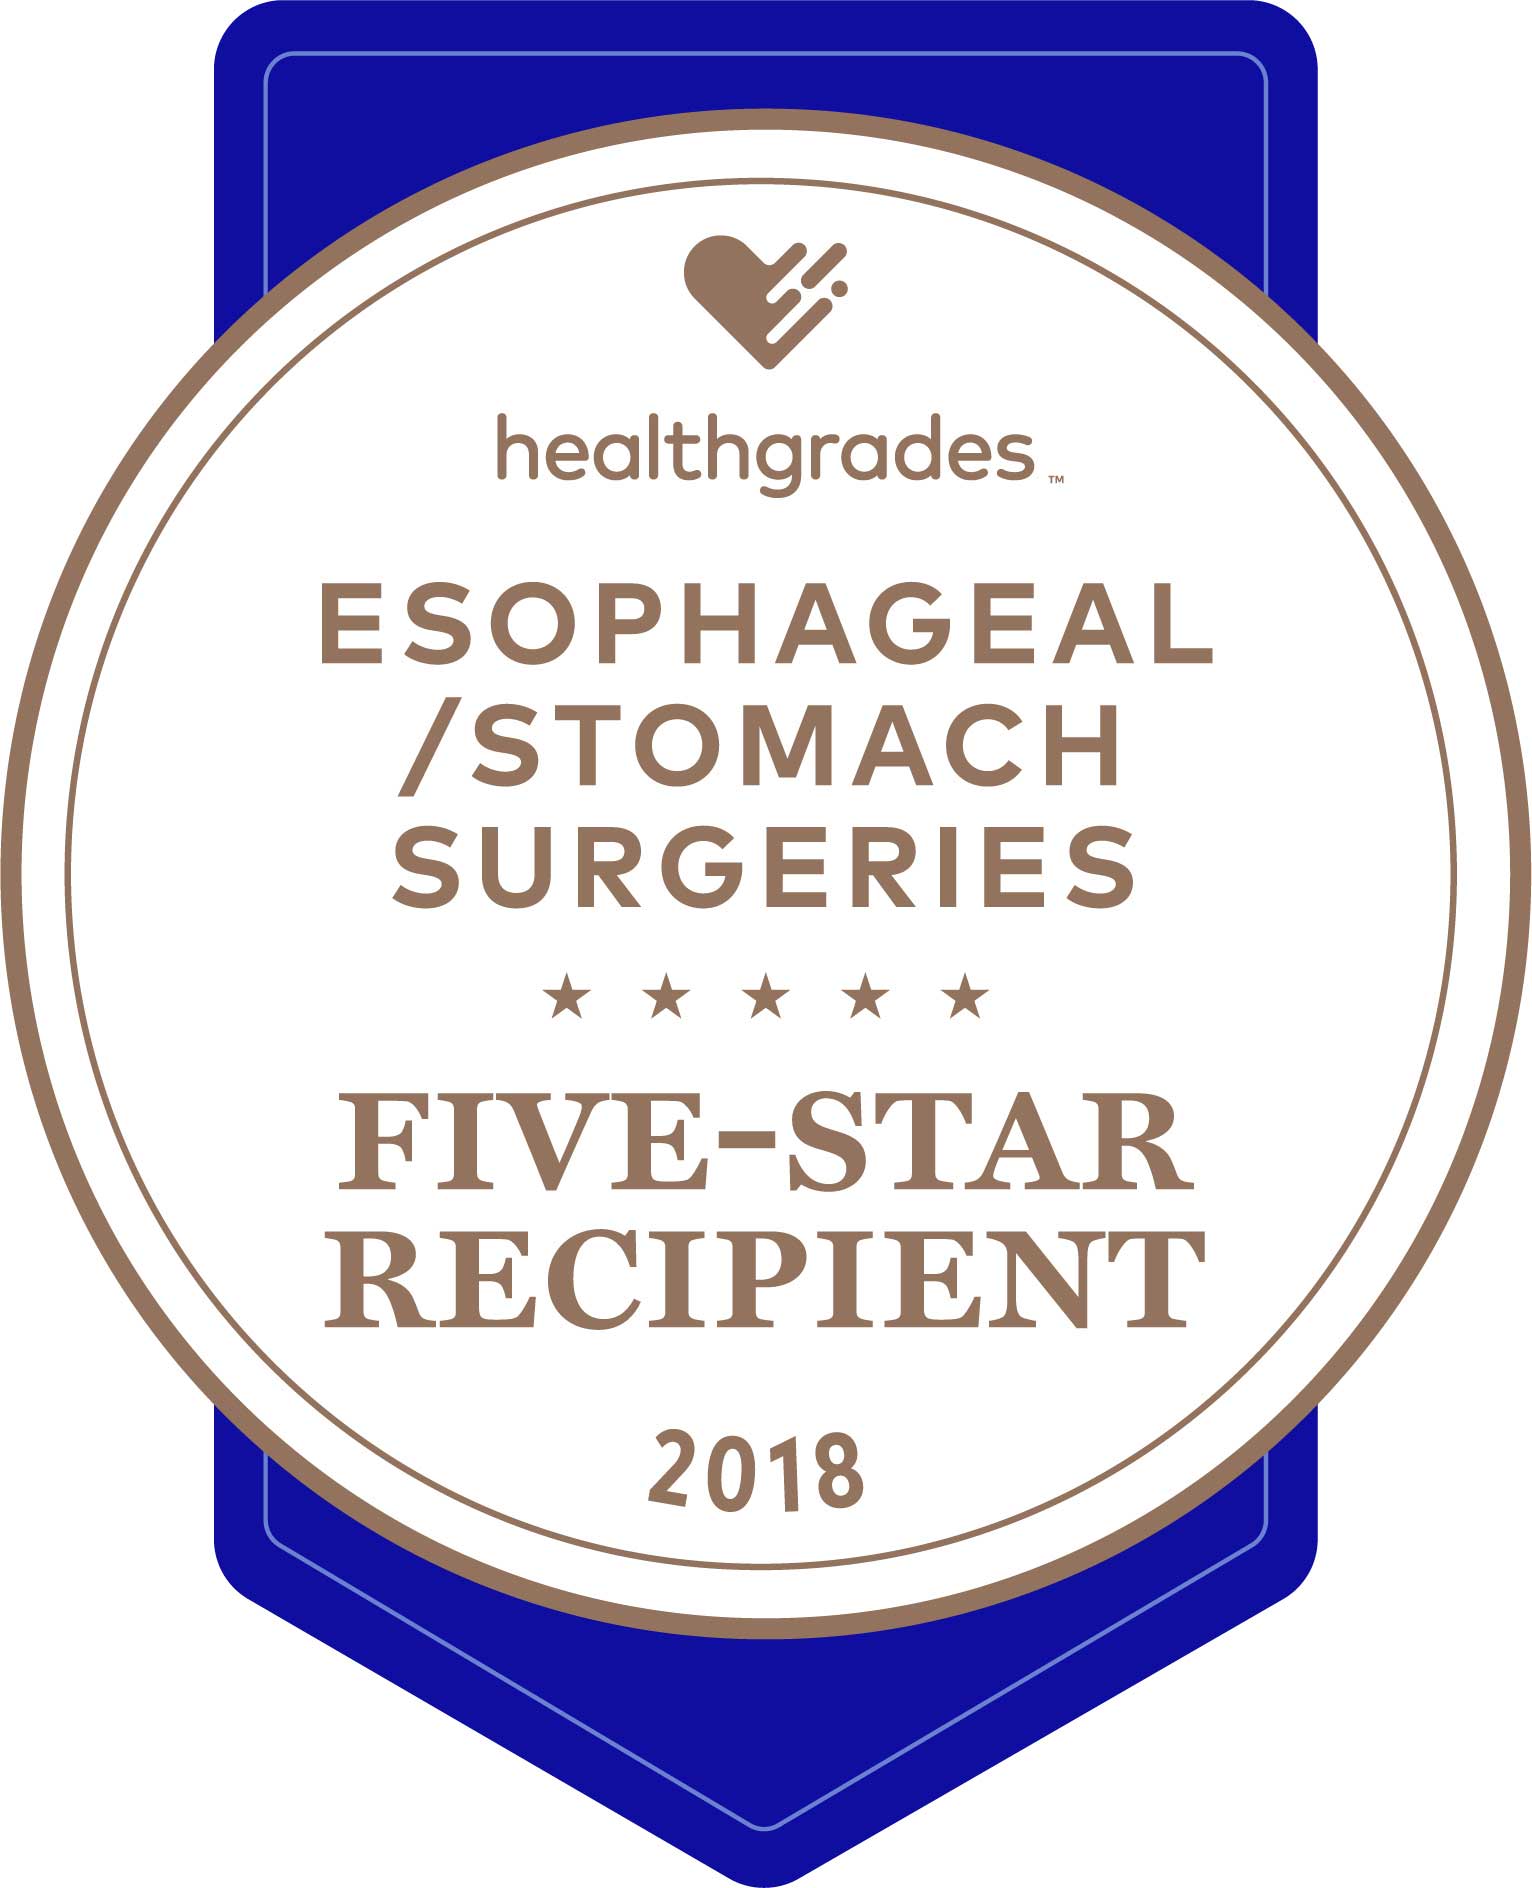 HG five star for esophageal stomach surgeries